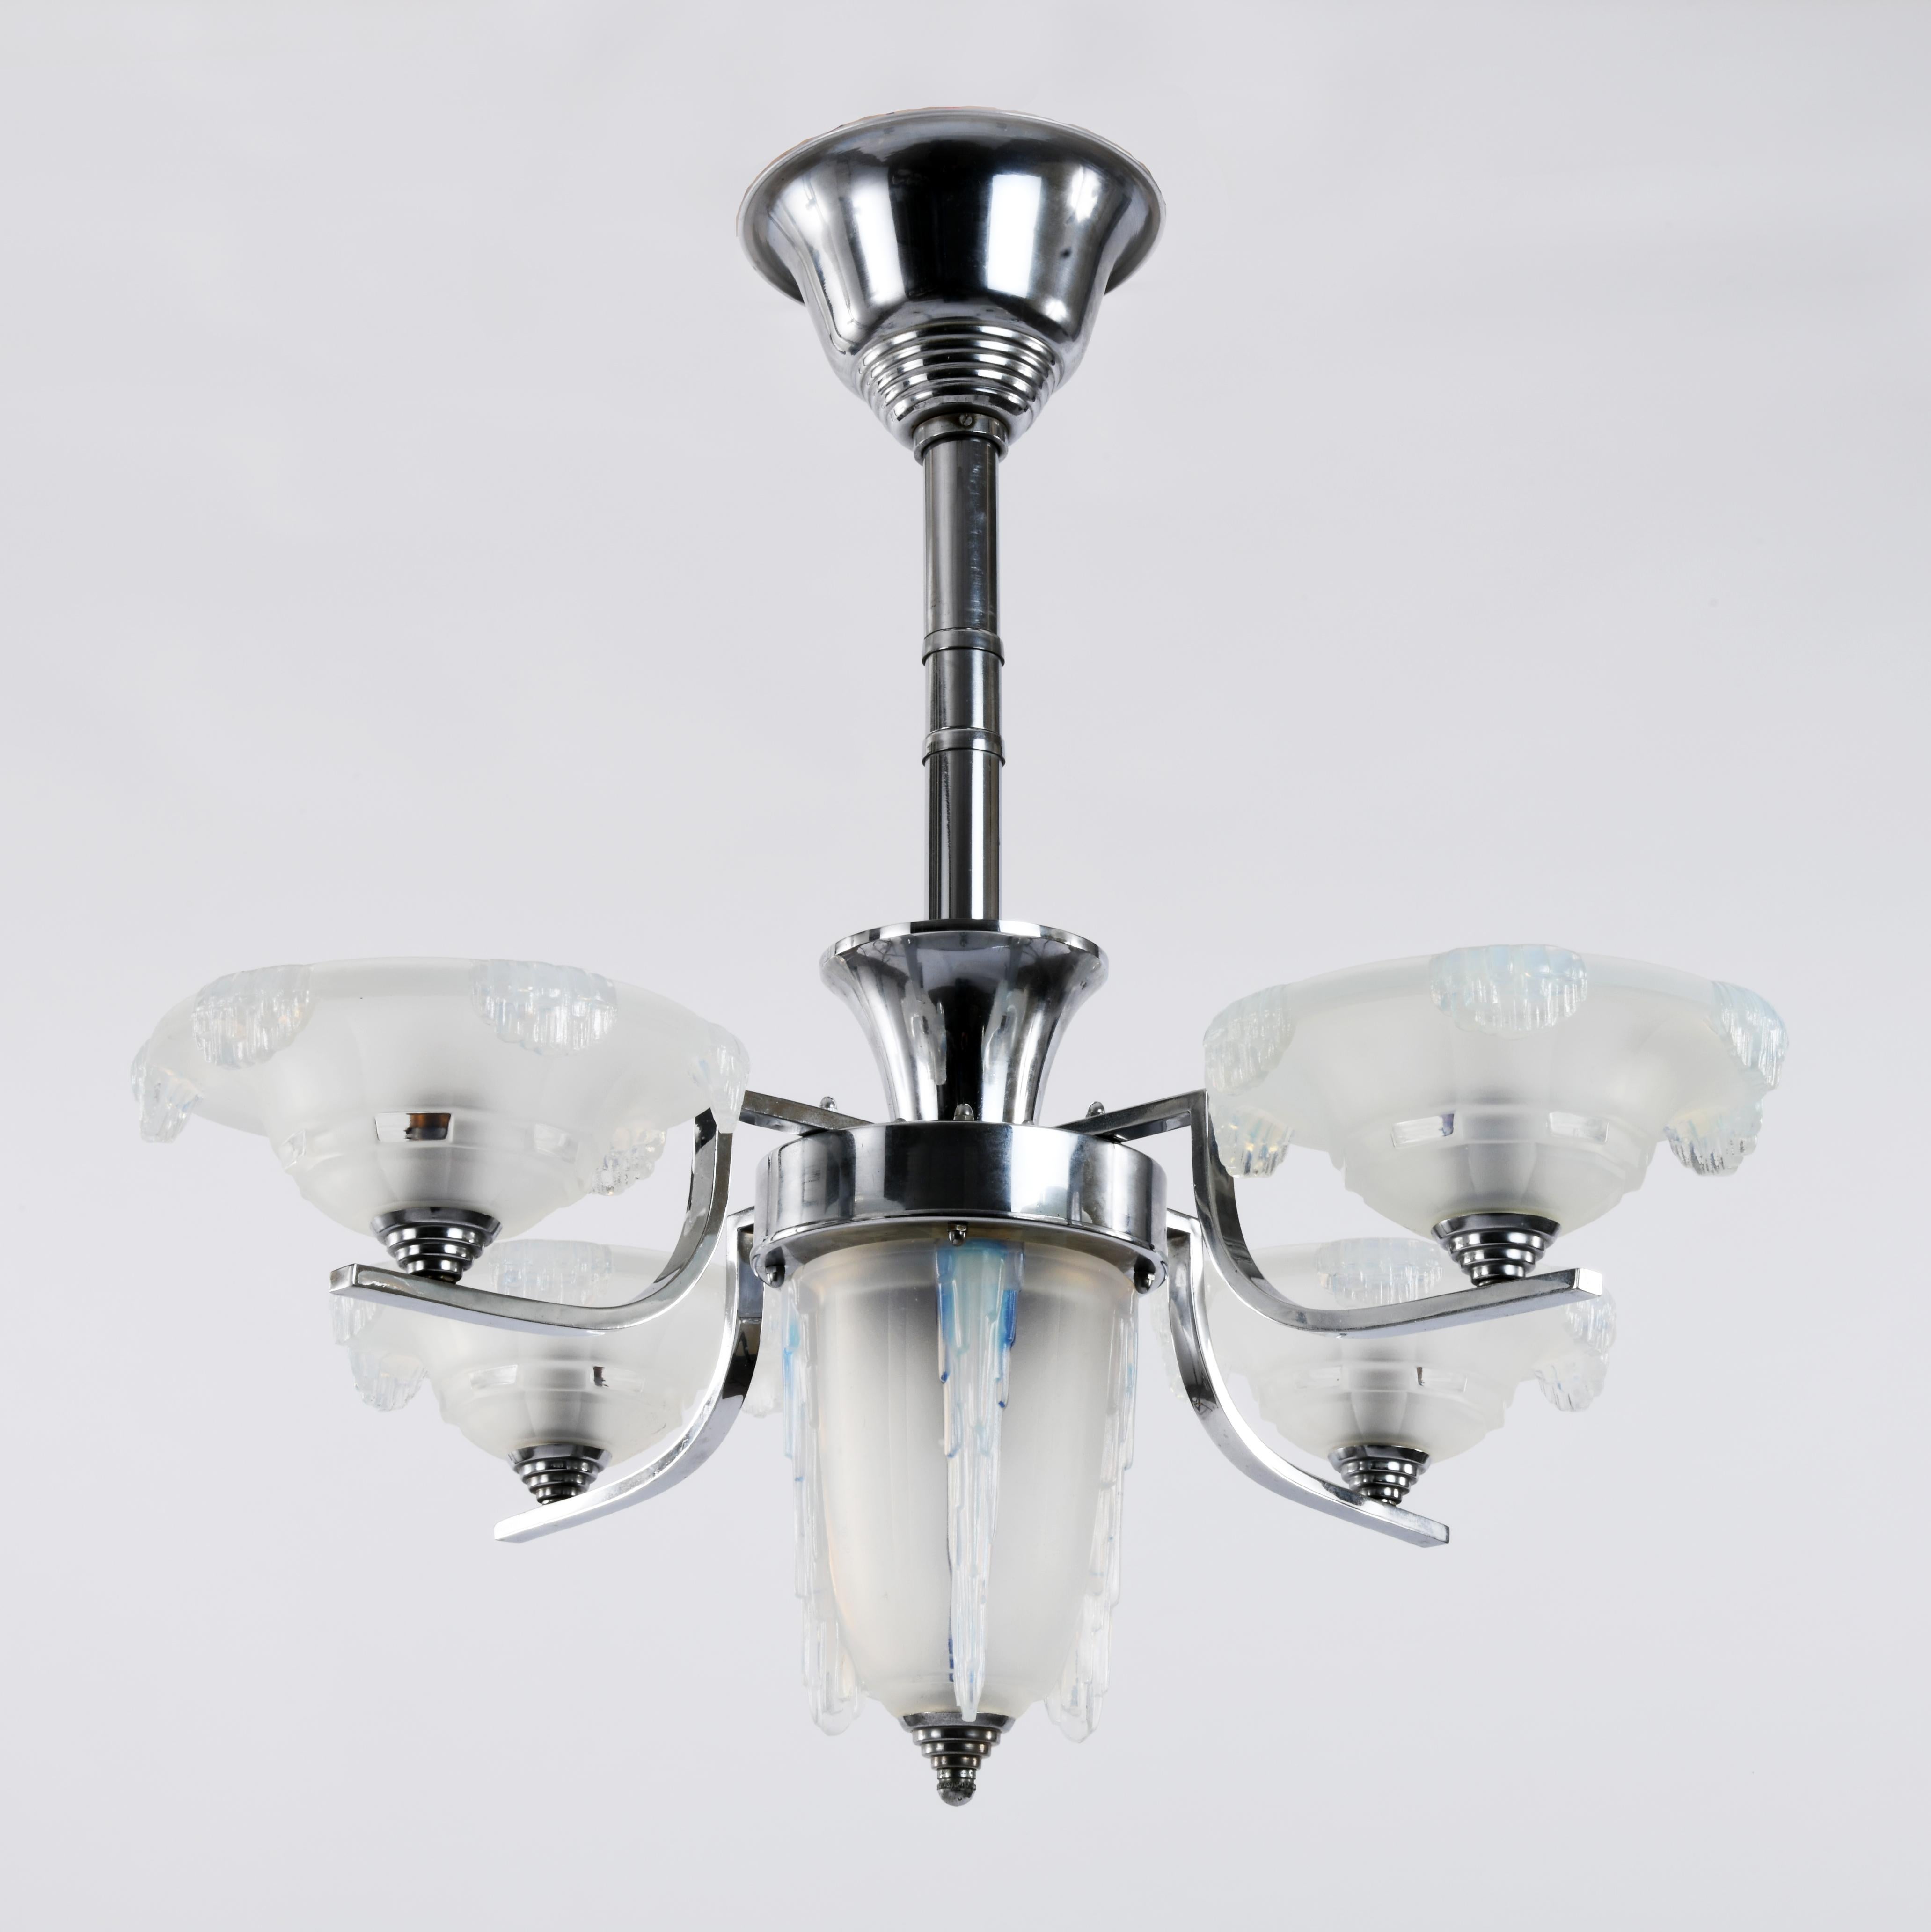 Art Deco period 5-light chandelier in chromed metal and opalescent glass with slightly bluish reflections. It has four branches ending in glass cups with four B22 bayonet bulbs and a fifth central light with the same socket. Beautiful Art Deco work